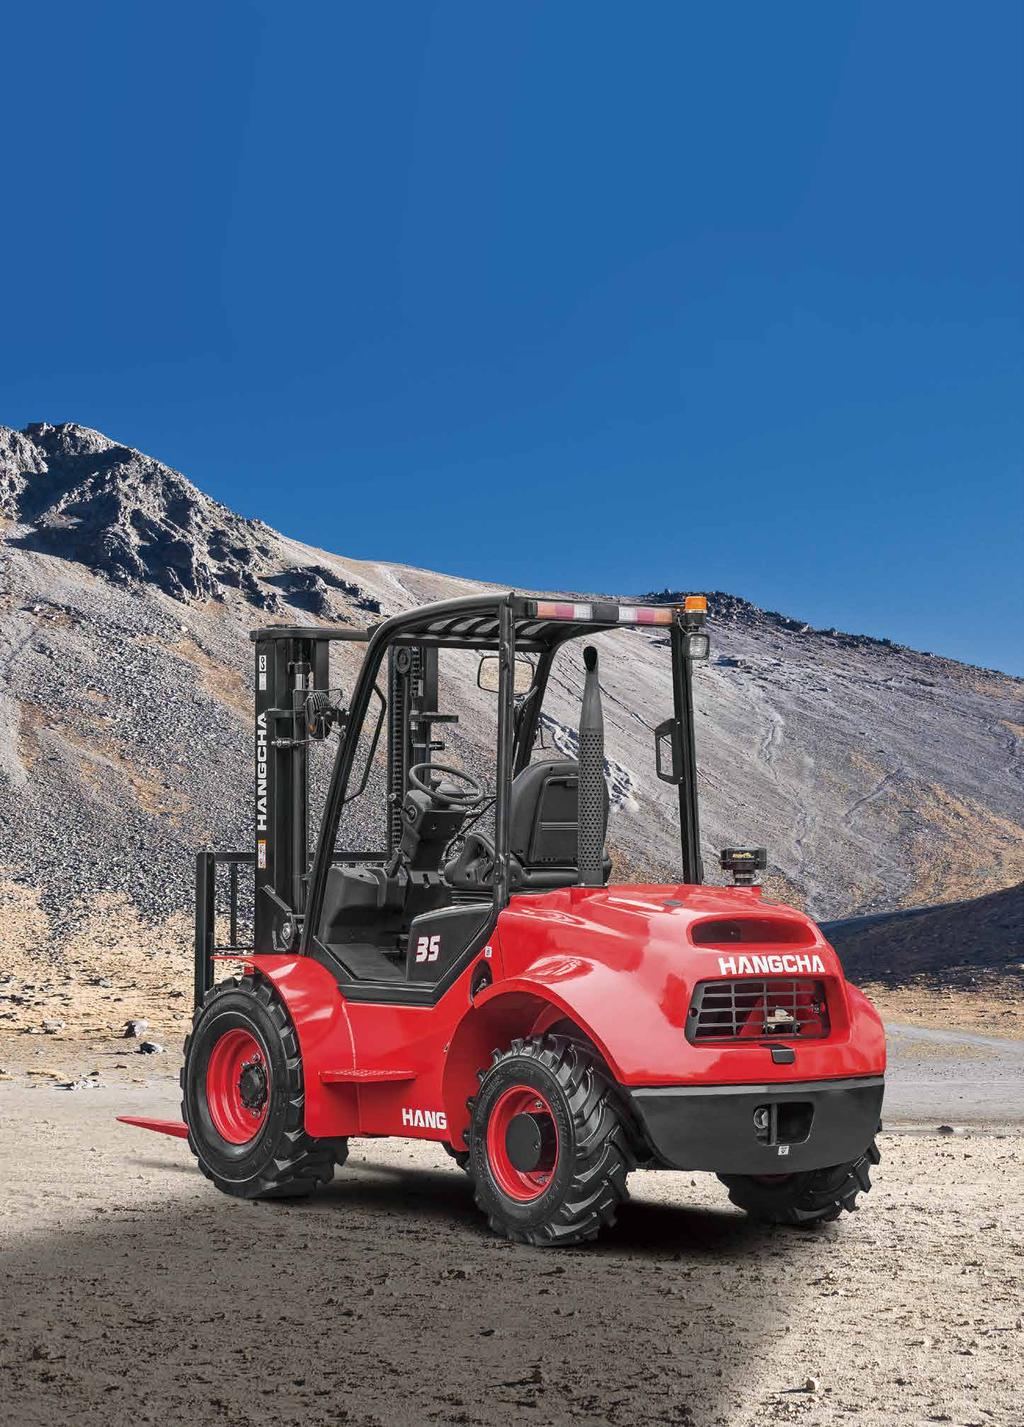 Four-Wheel Drive Rough Terrain Forklift with capacities of 5,000 to 7,000lbs A M E R I C A lbs 7000 Company address: 405-A Granite Street Charlotte, NC 28273 5000 4000 3000 2000 Facebook Toll Free